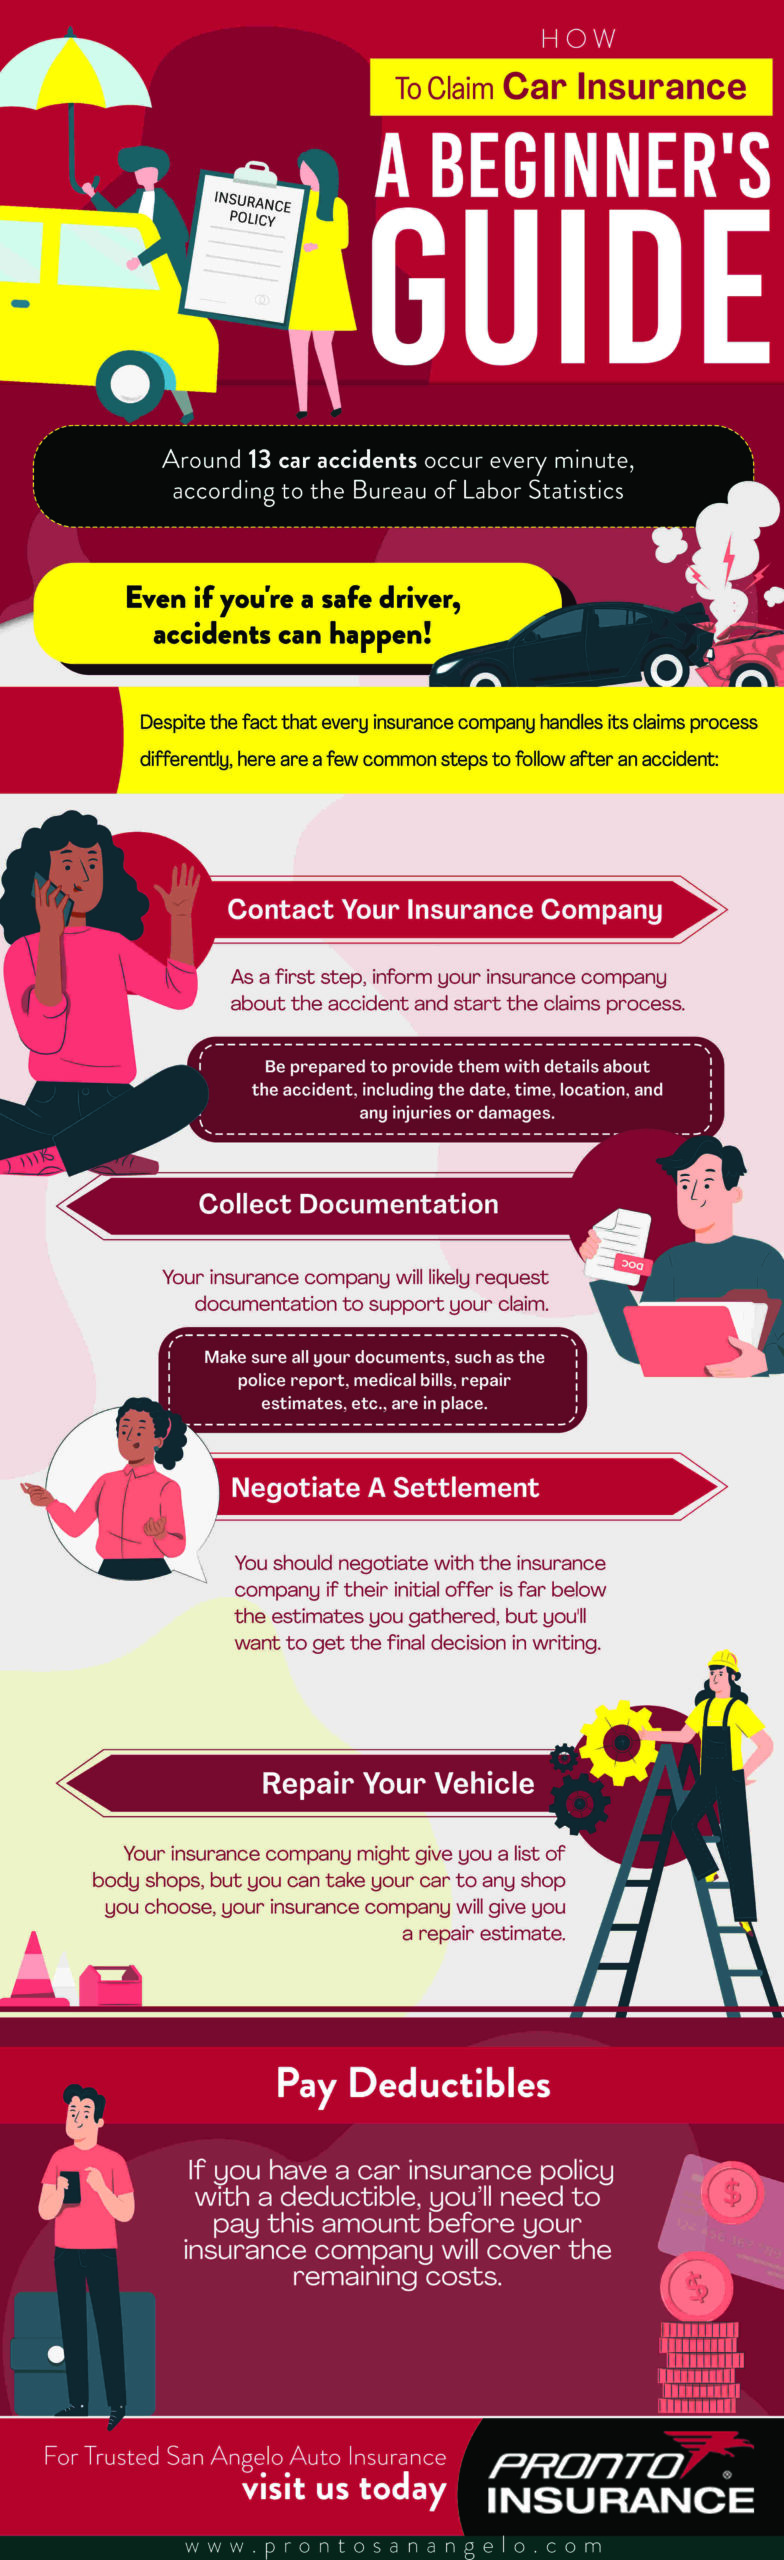 How To Claim Car Insurance: A Beginner's Guide